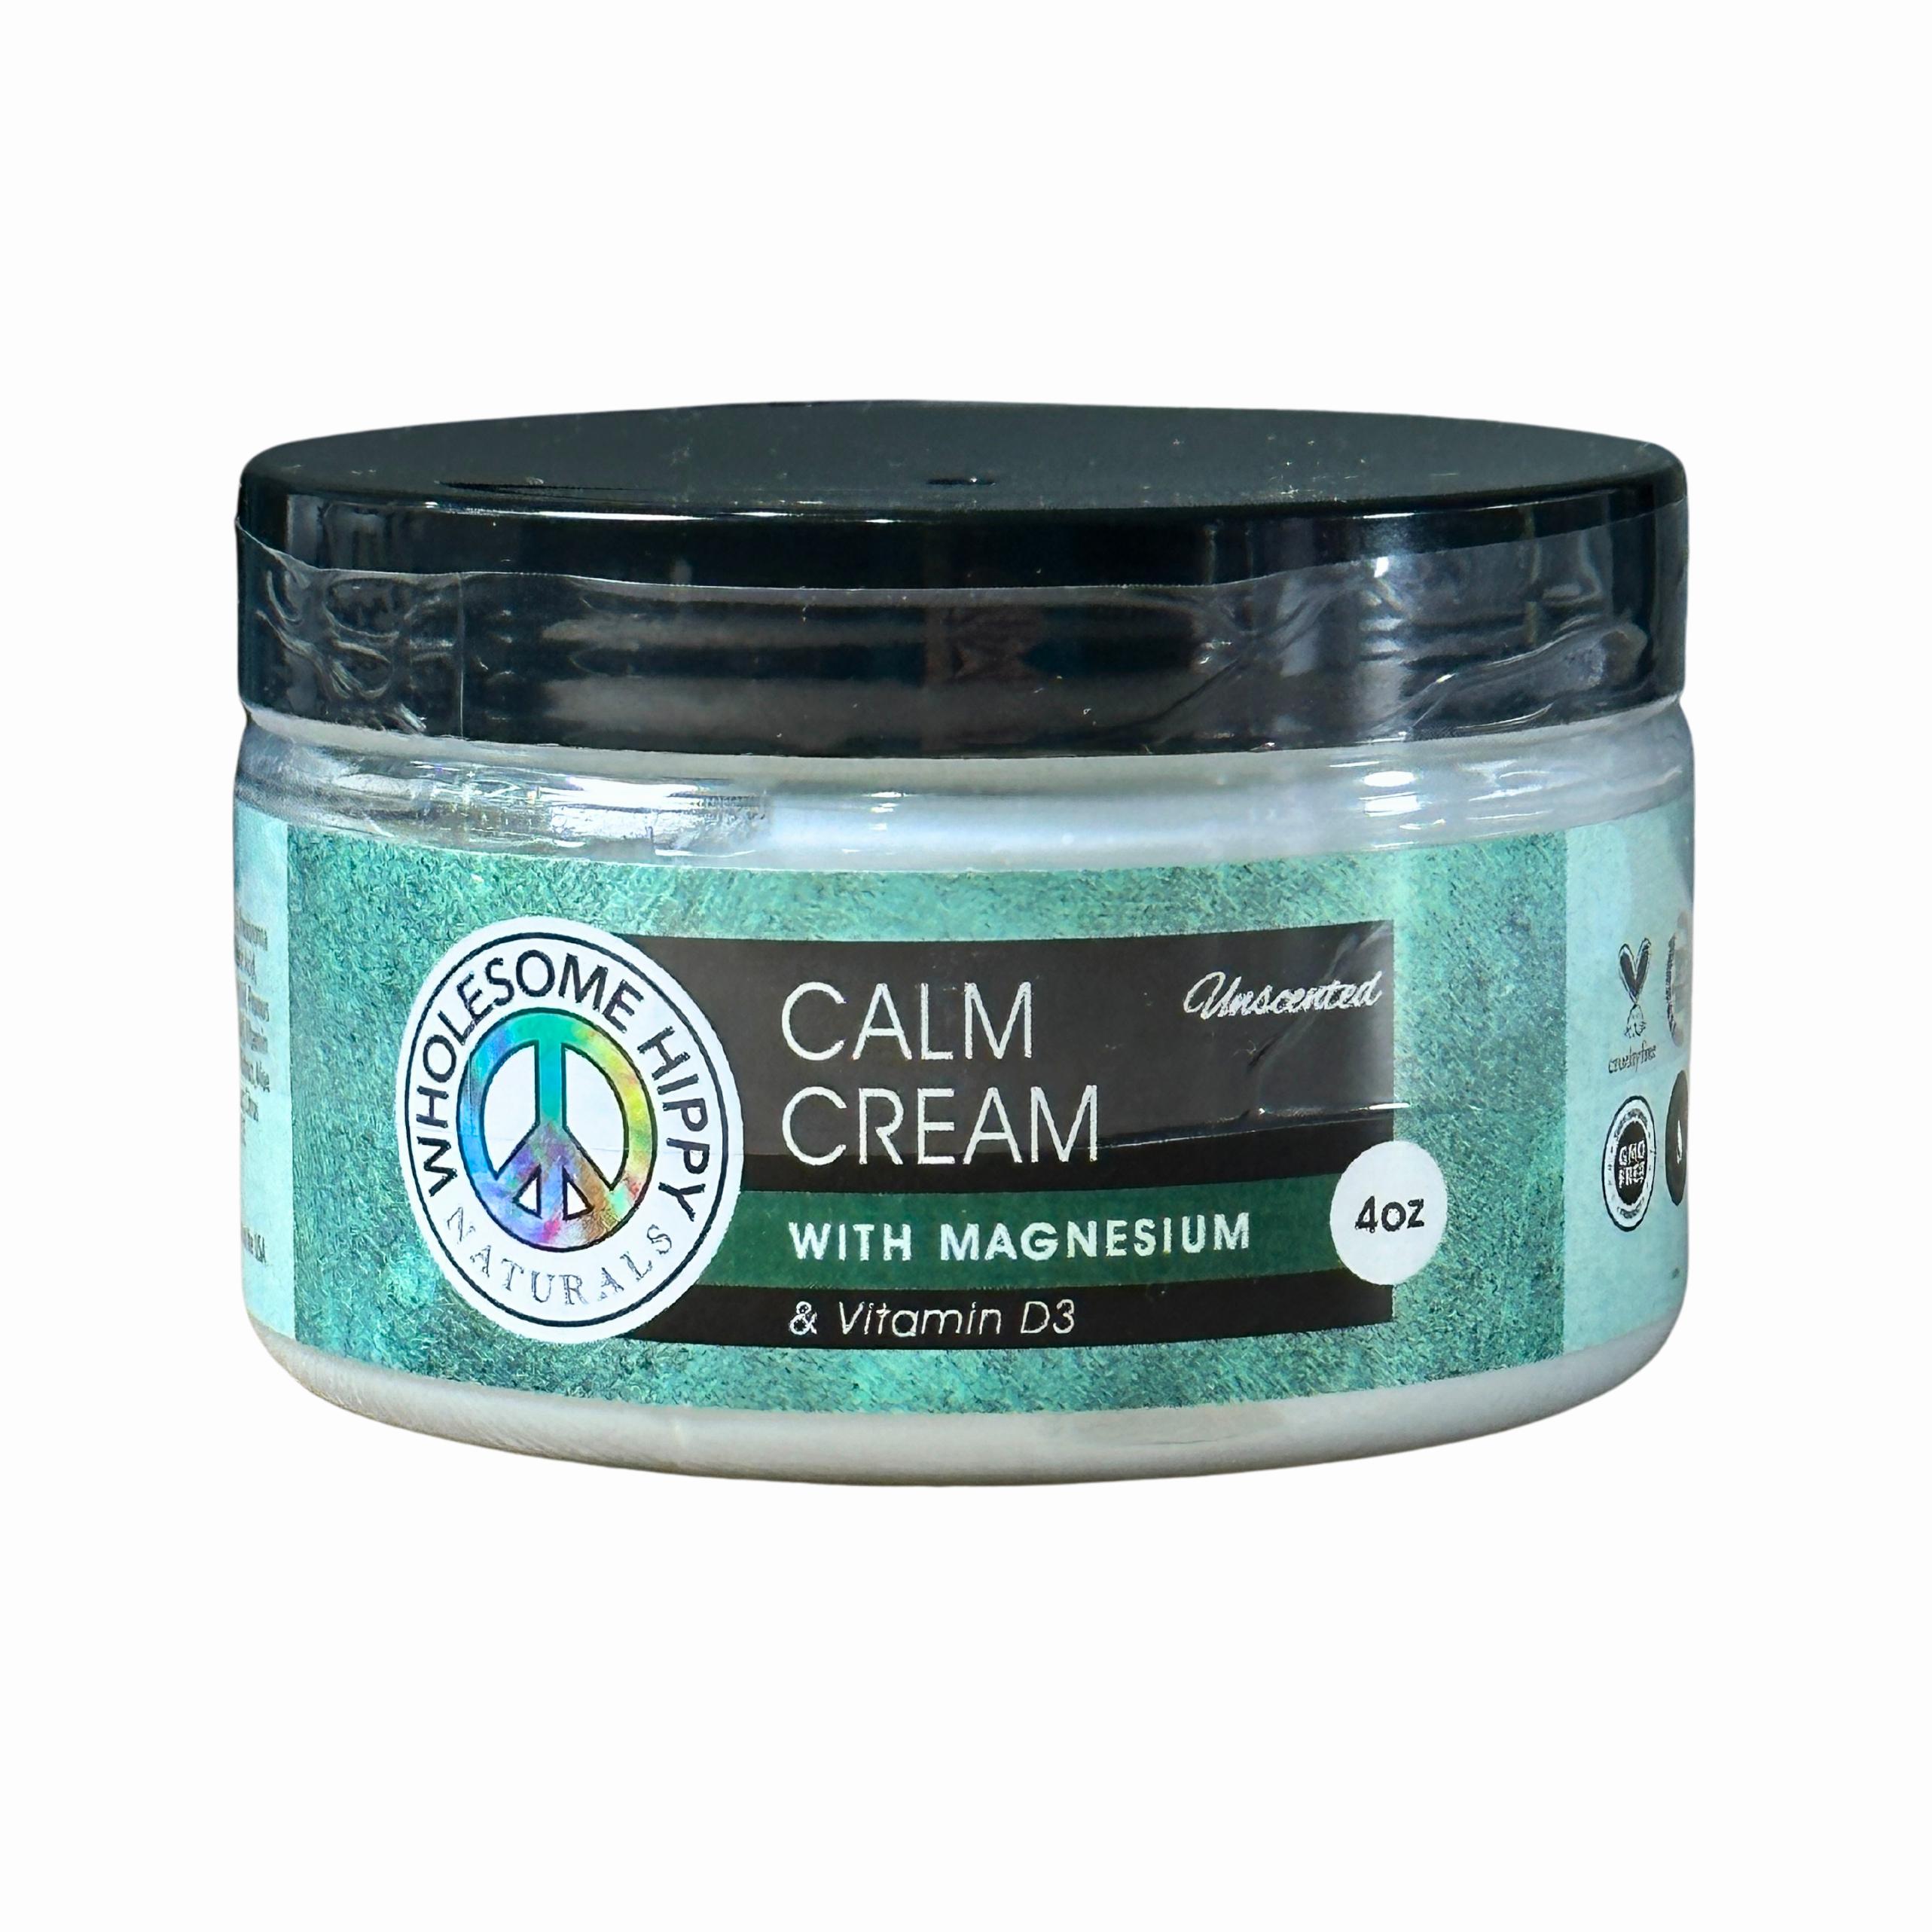 A jar of Calm Cream with magnesium and vitamin D3, labeled as unscented and cruelty-free.